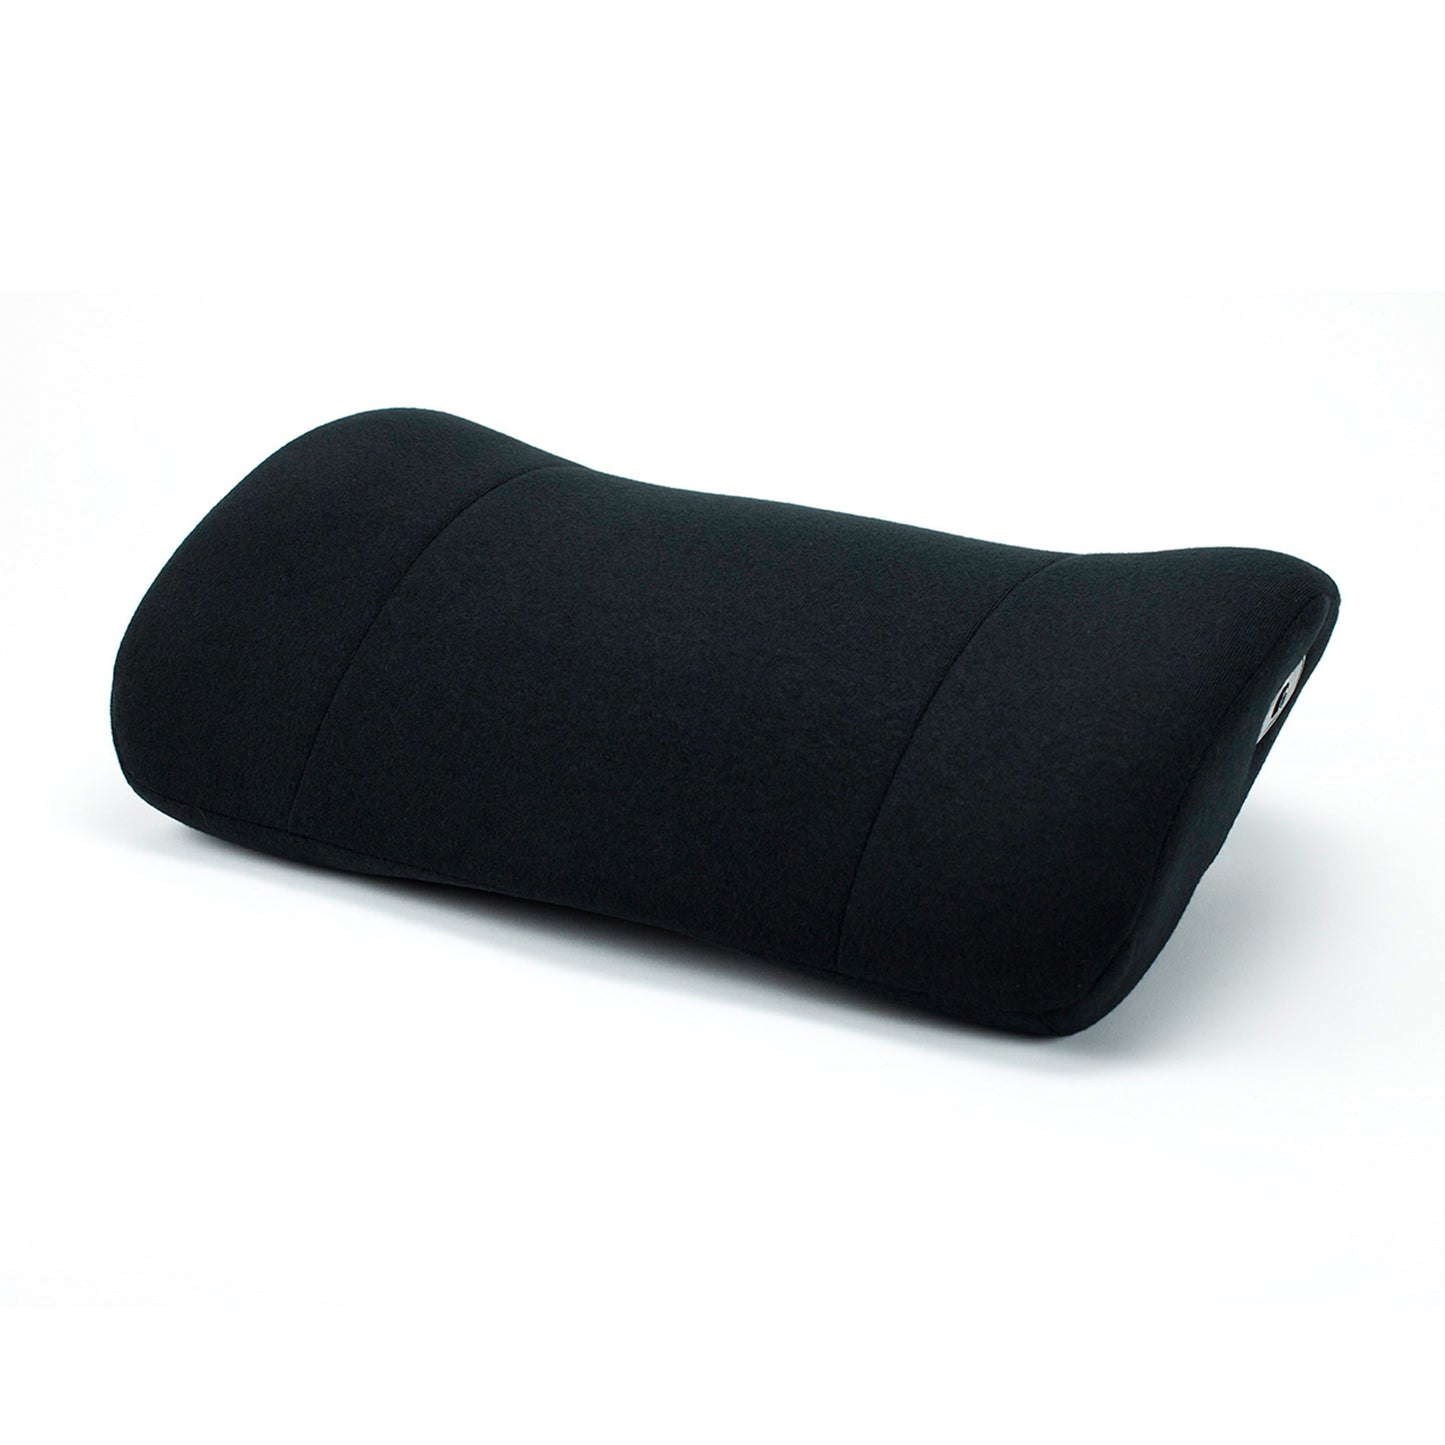 ObusForme Battery Operated Vibration Massage Lumbar Support - 15-07375